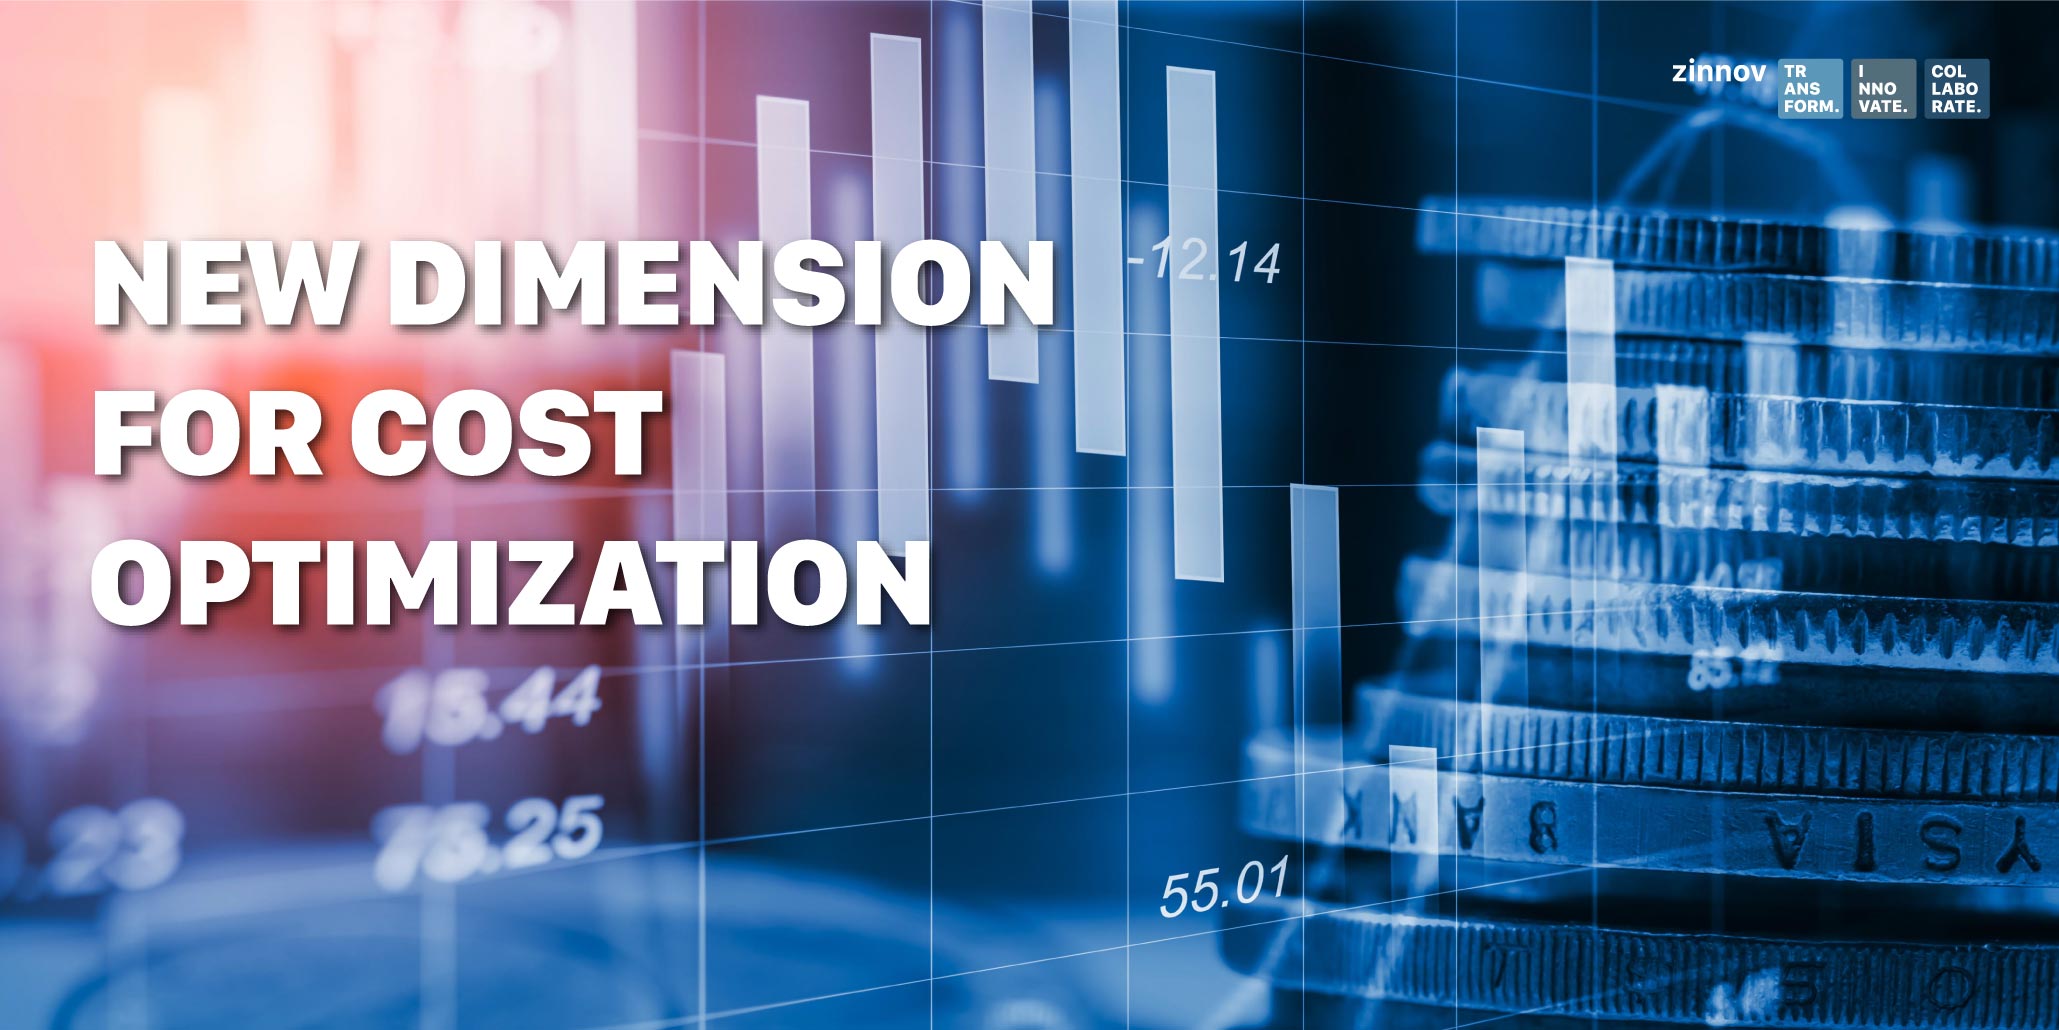 New dimension for cost optimization